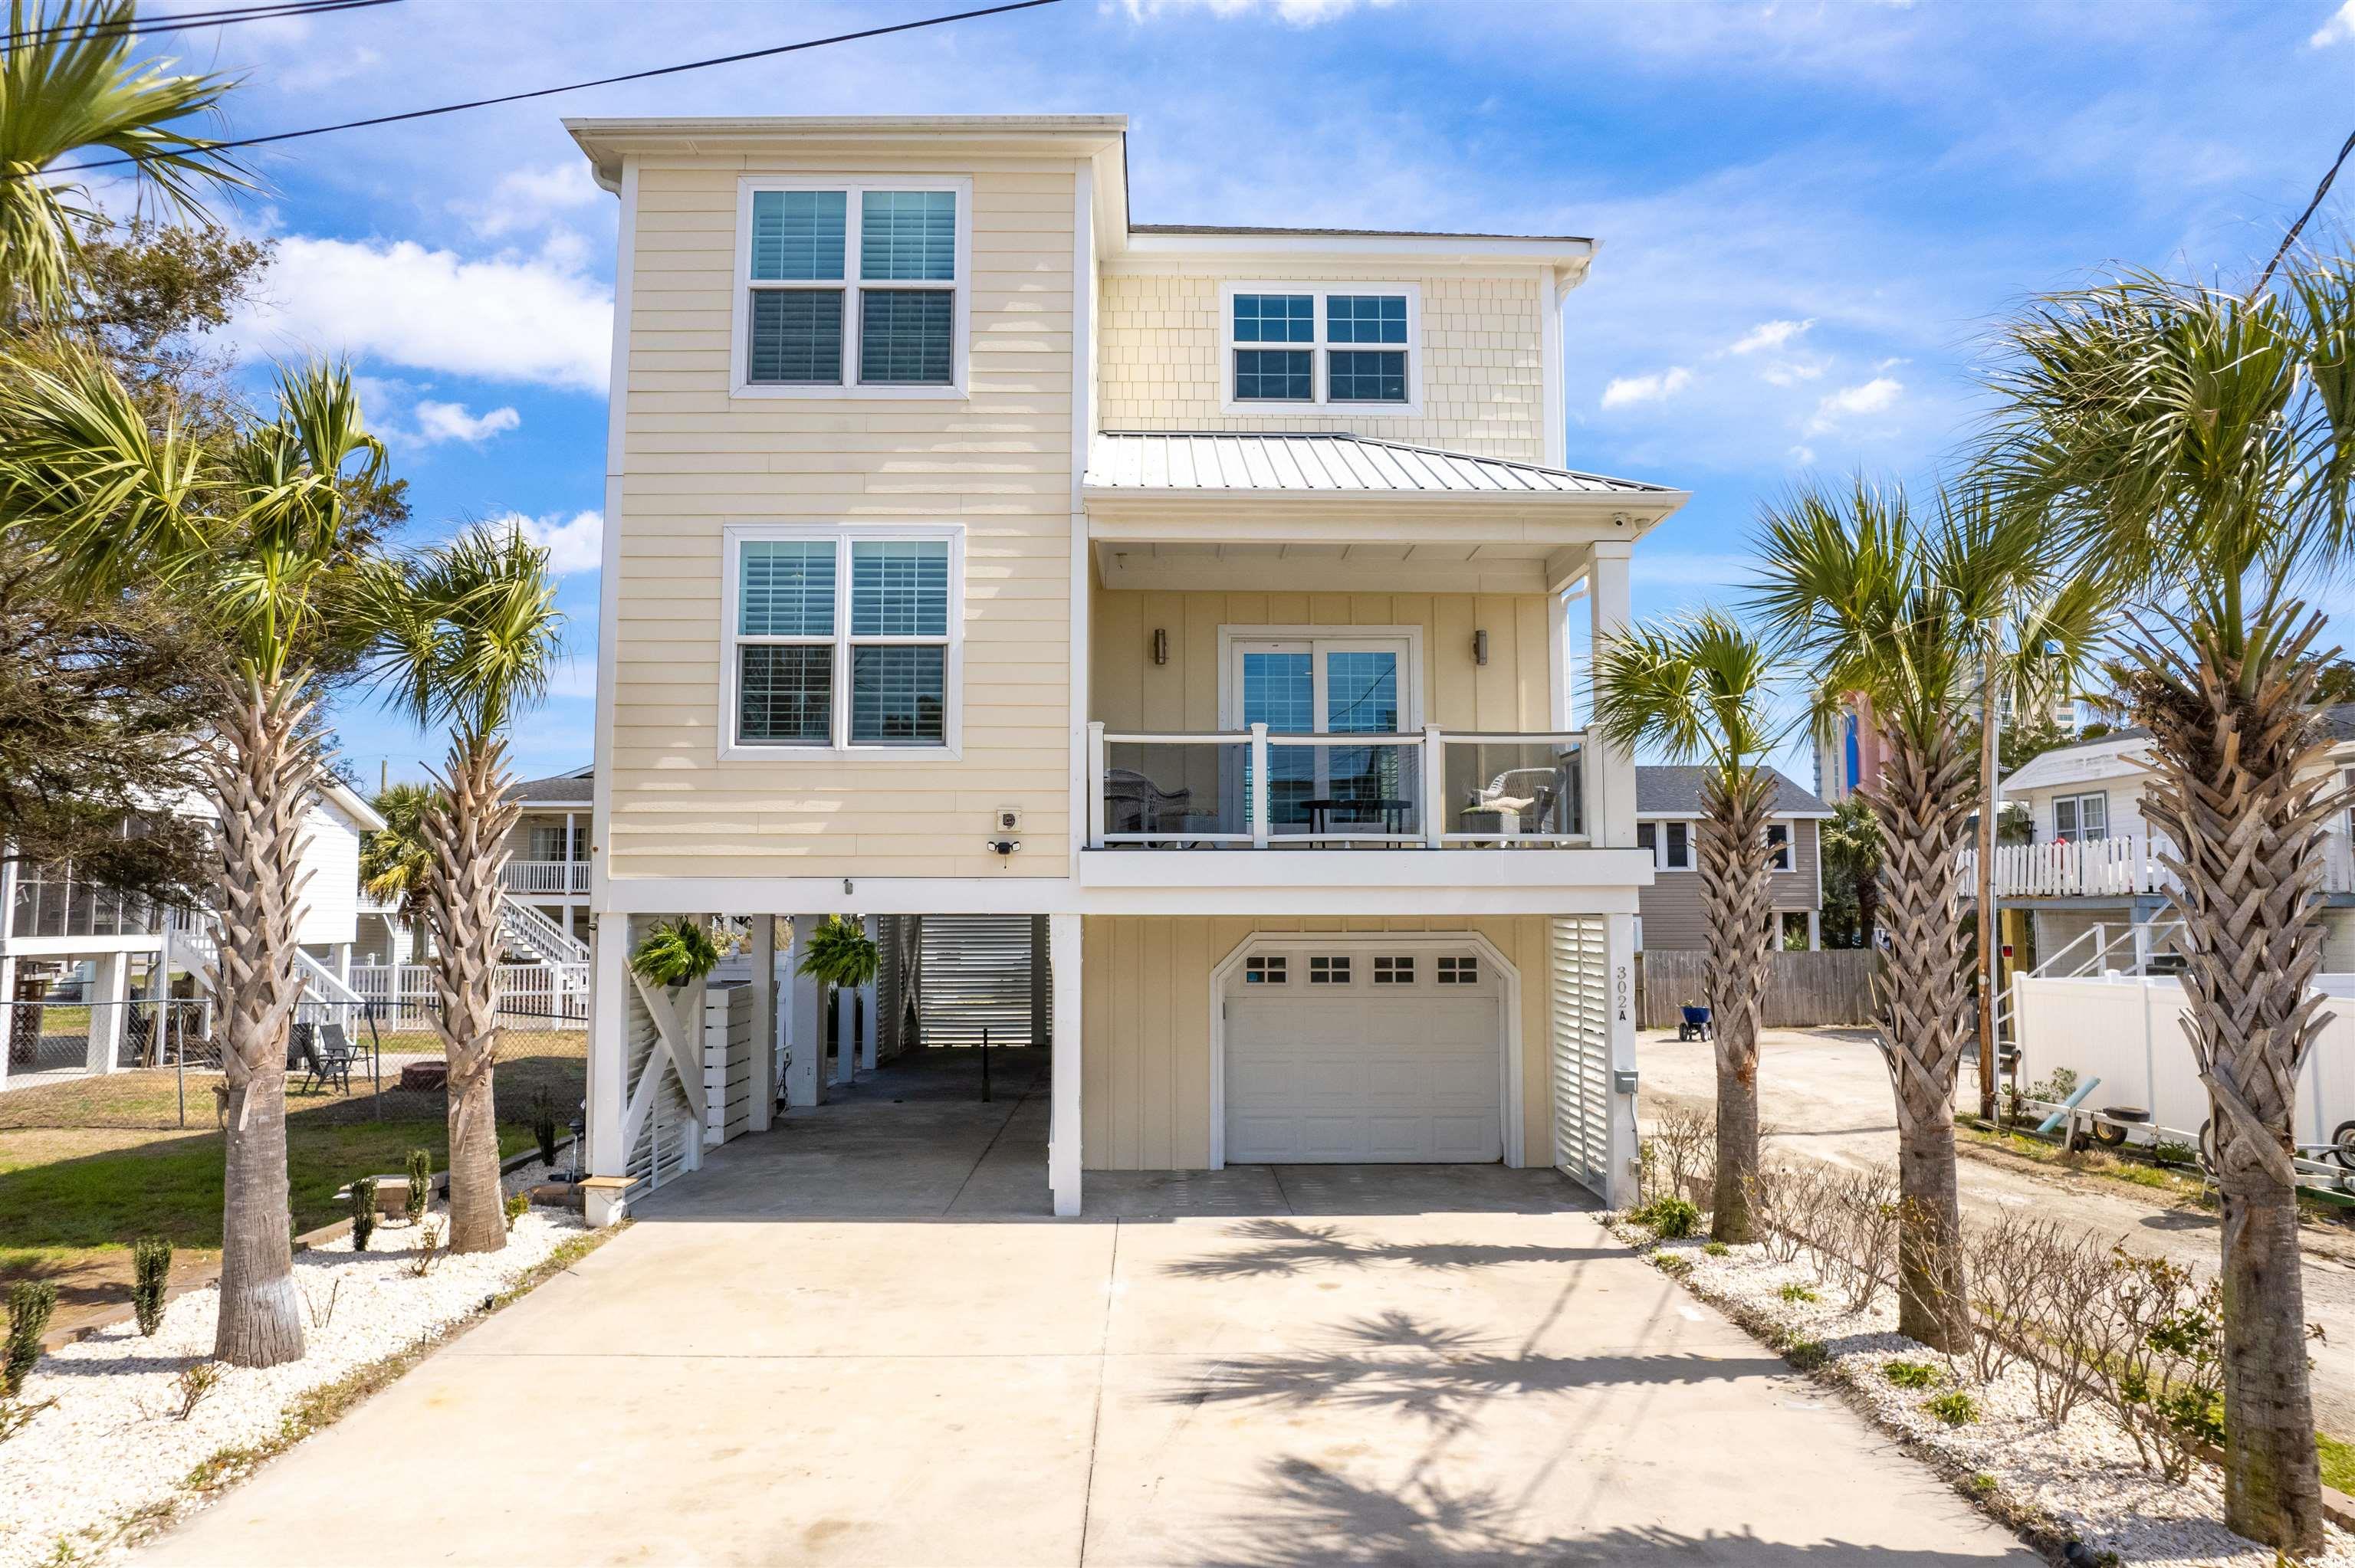 302A 32nd Ave. N, North Myrtle Beach, SC 29582